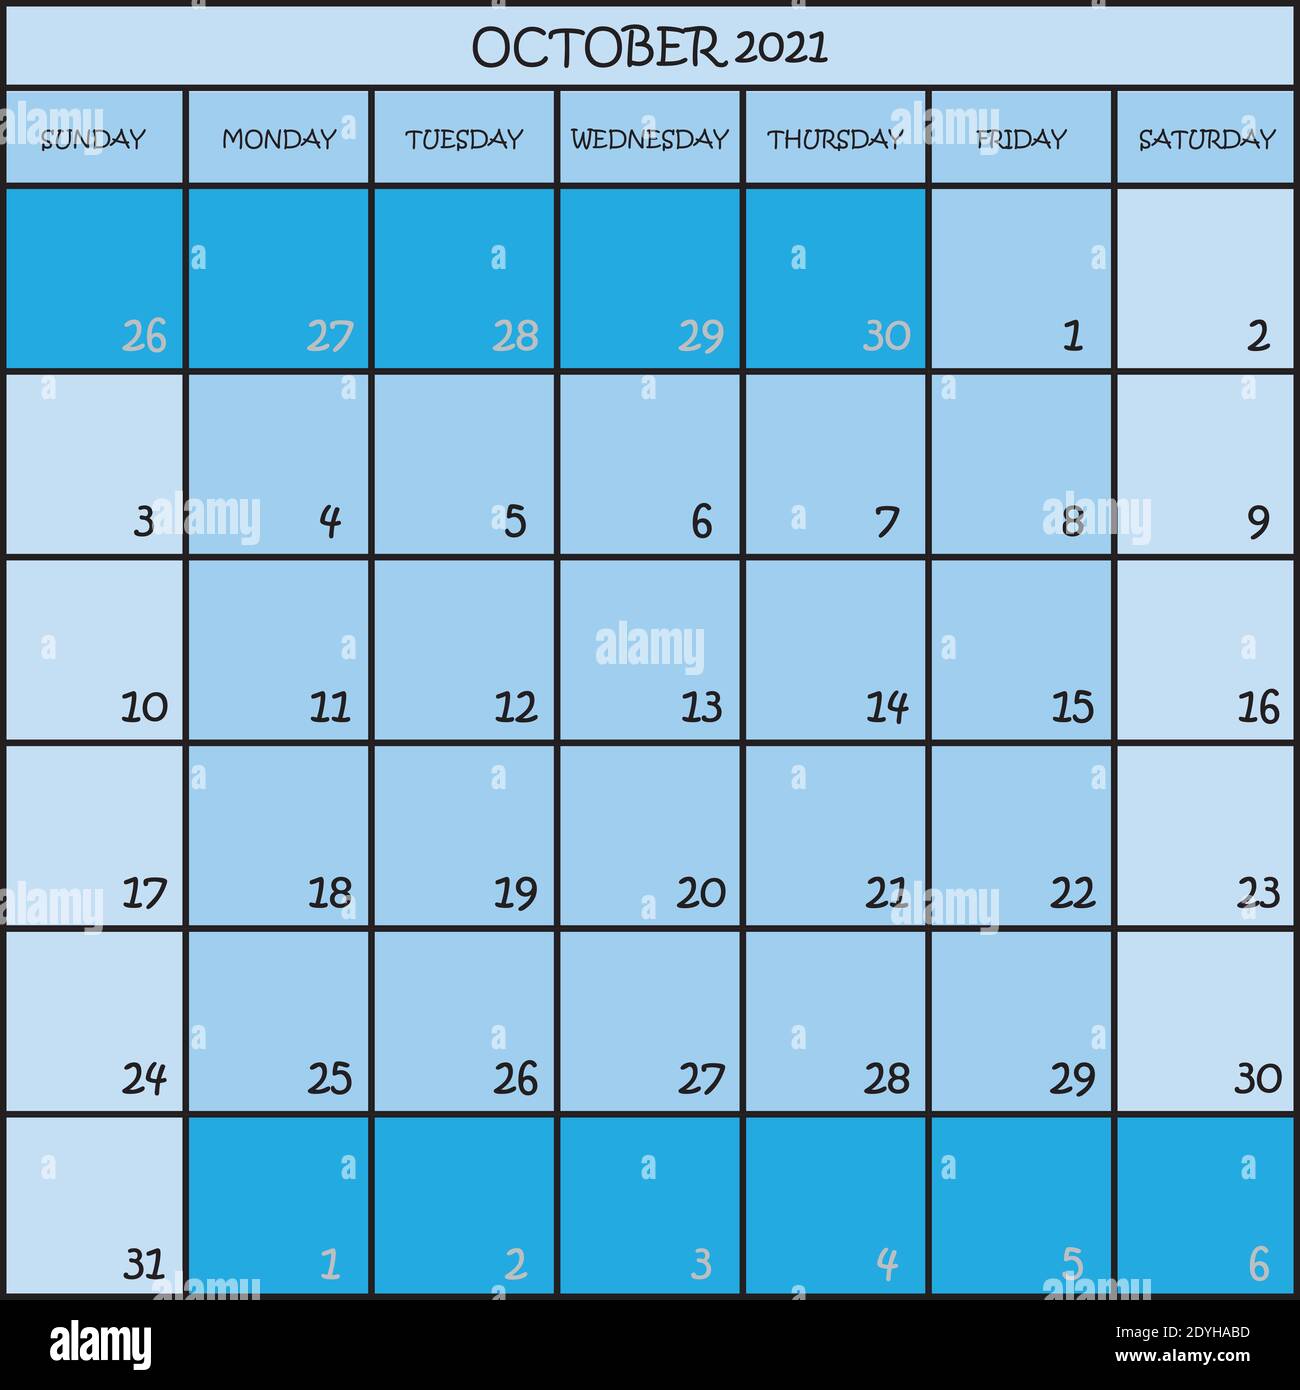 CALENDAR PLANNER MONTH OCTOBER 2021 ON THREE SHADES OF BLUE COLOR BACKGROUND Stock Vector